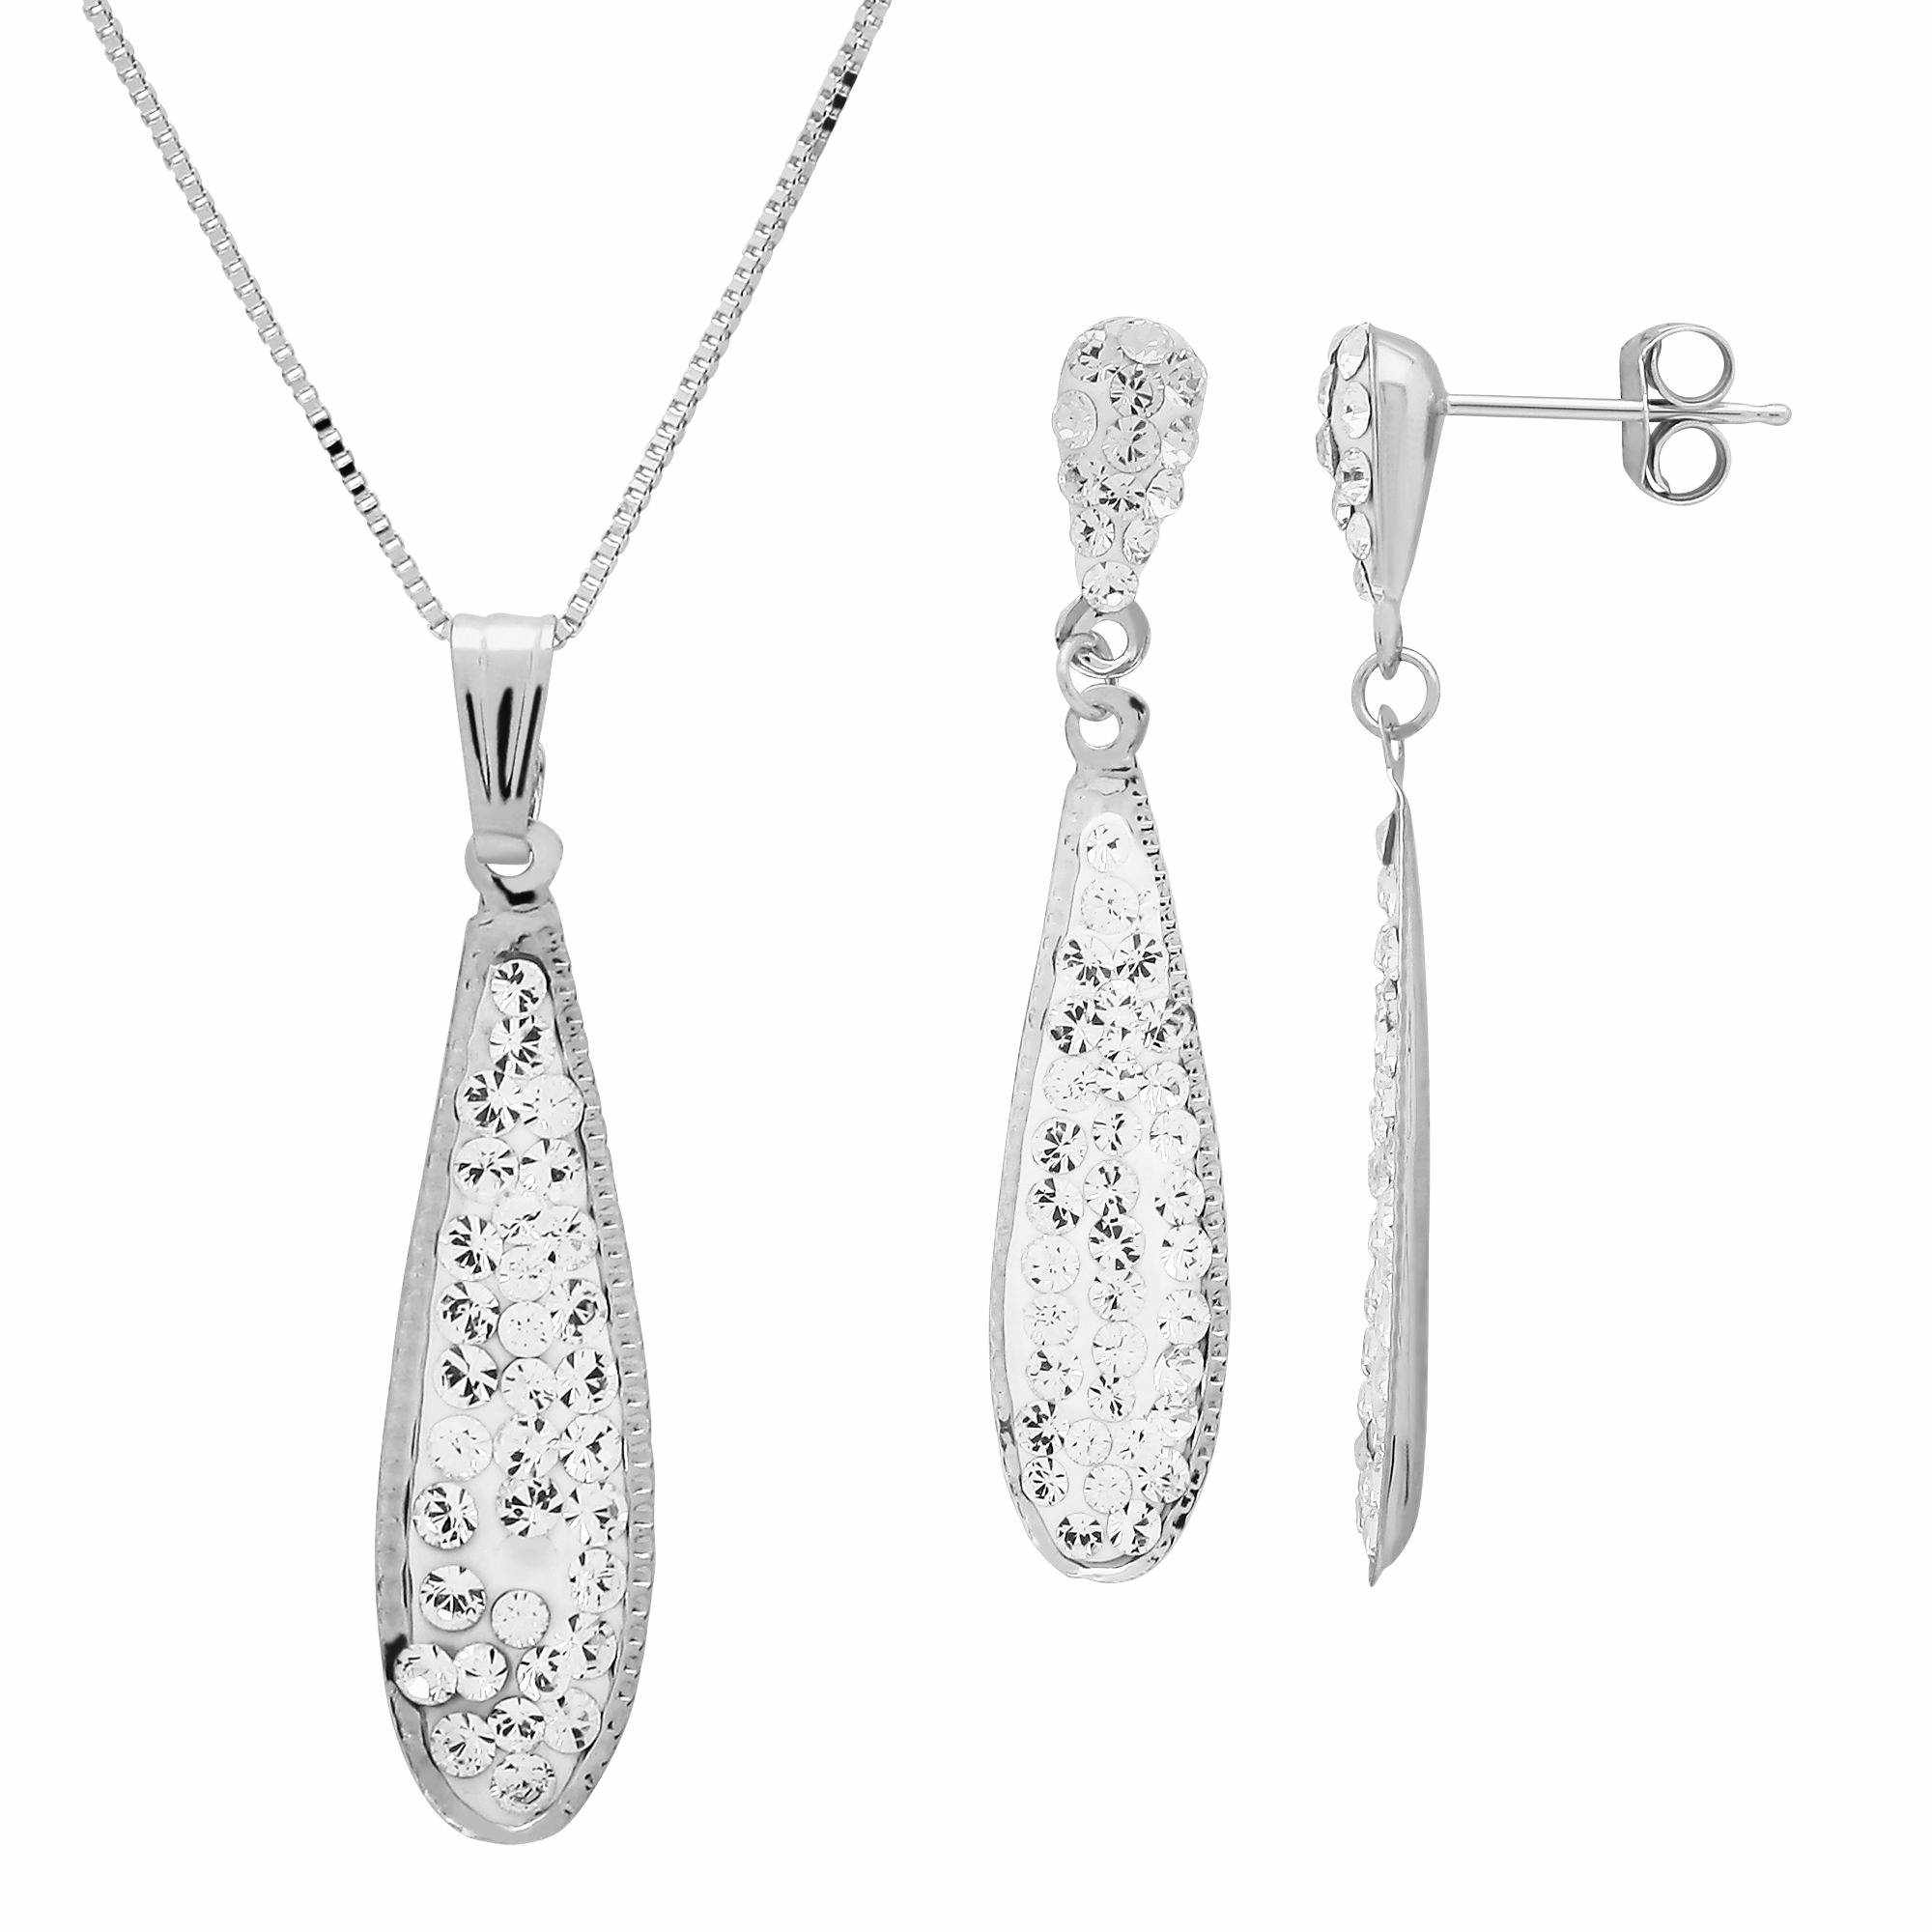 Rhodium Plated Long Teardrop Crystal Necklace And Earrings Set